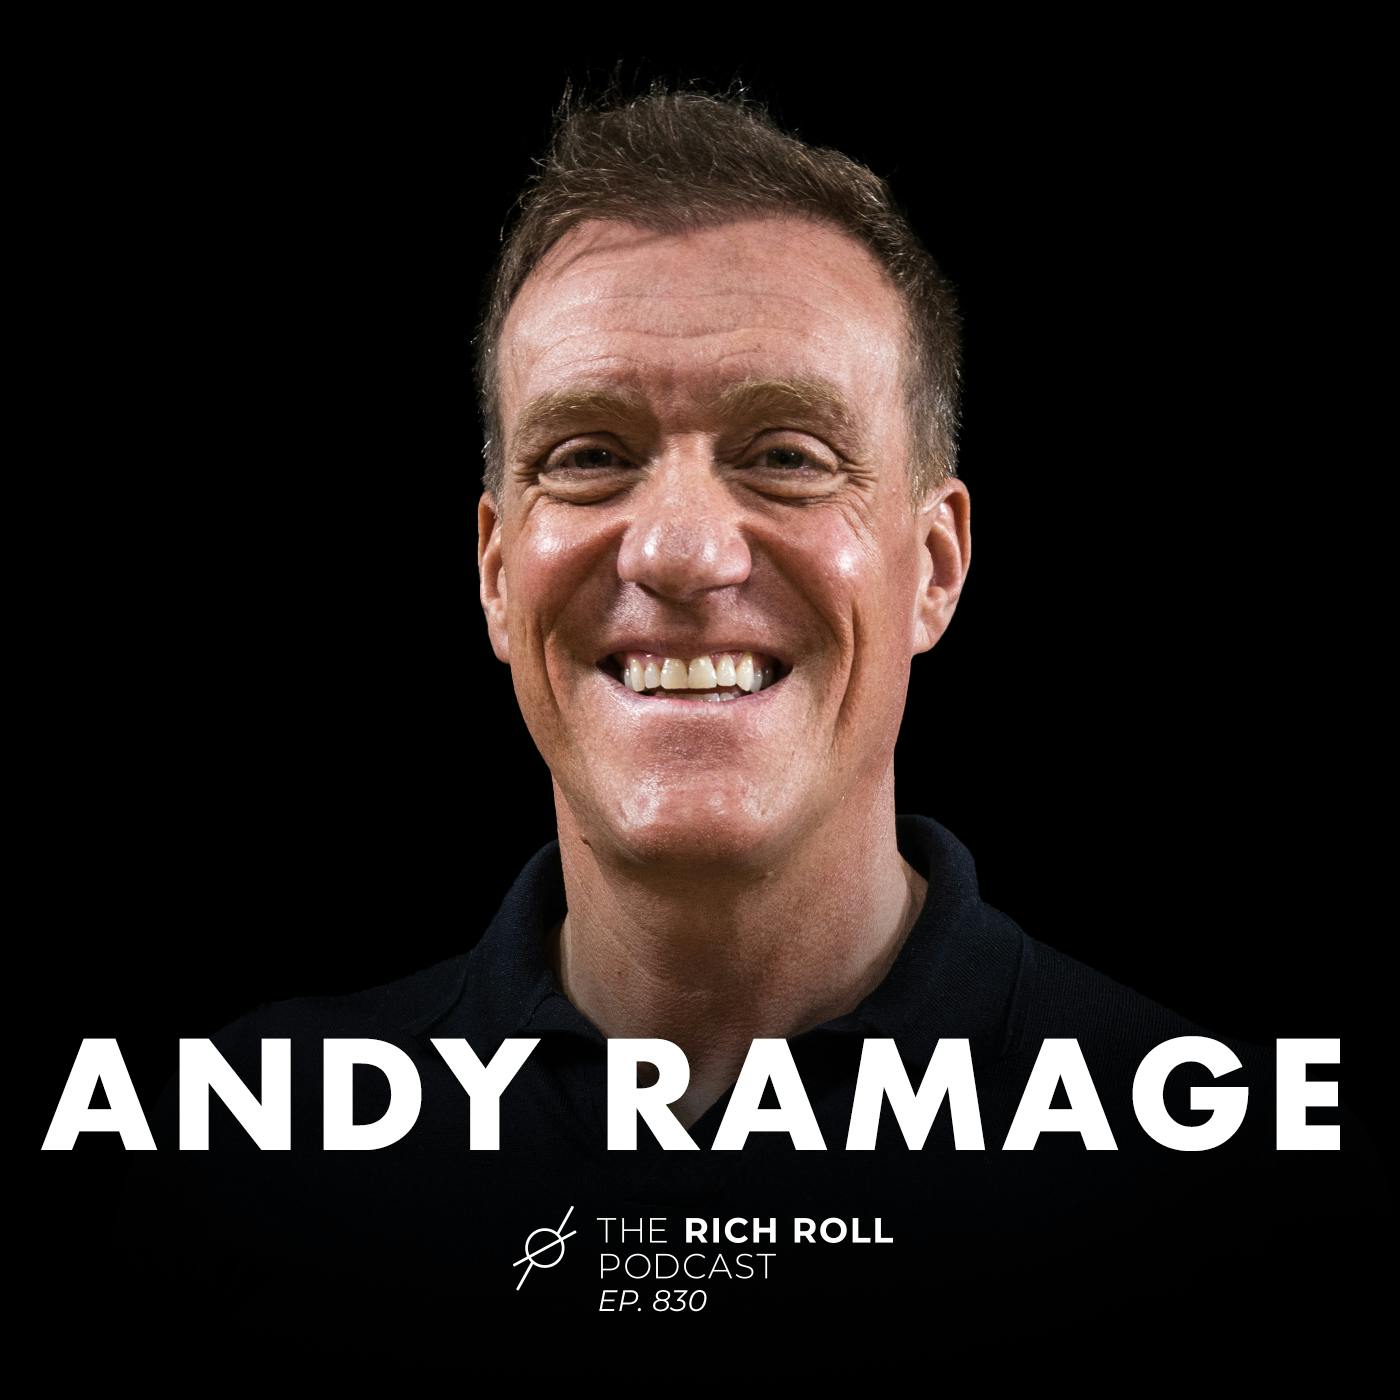 Andy Ramage on the Benefits of An Alcohol-Free Lifestyle